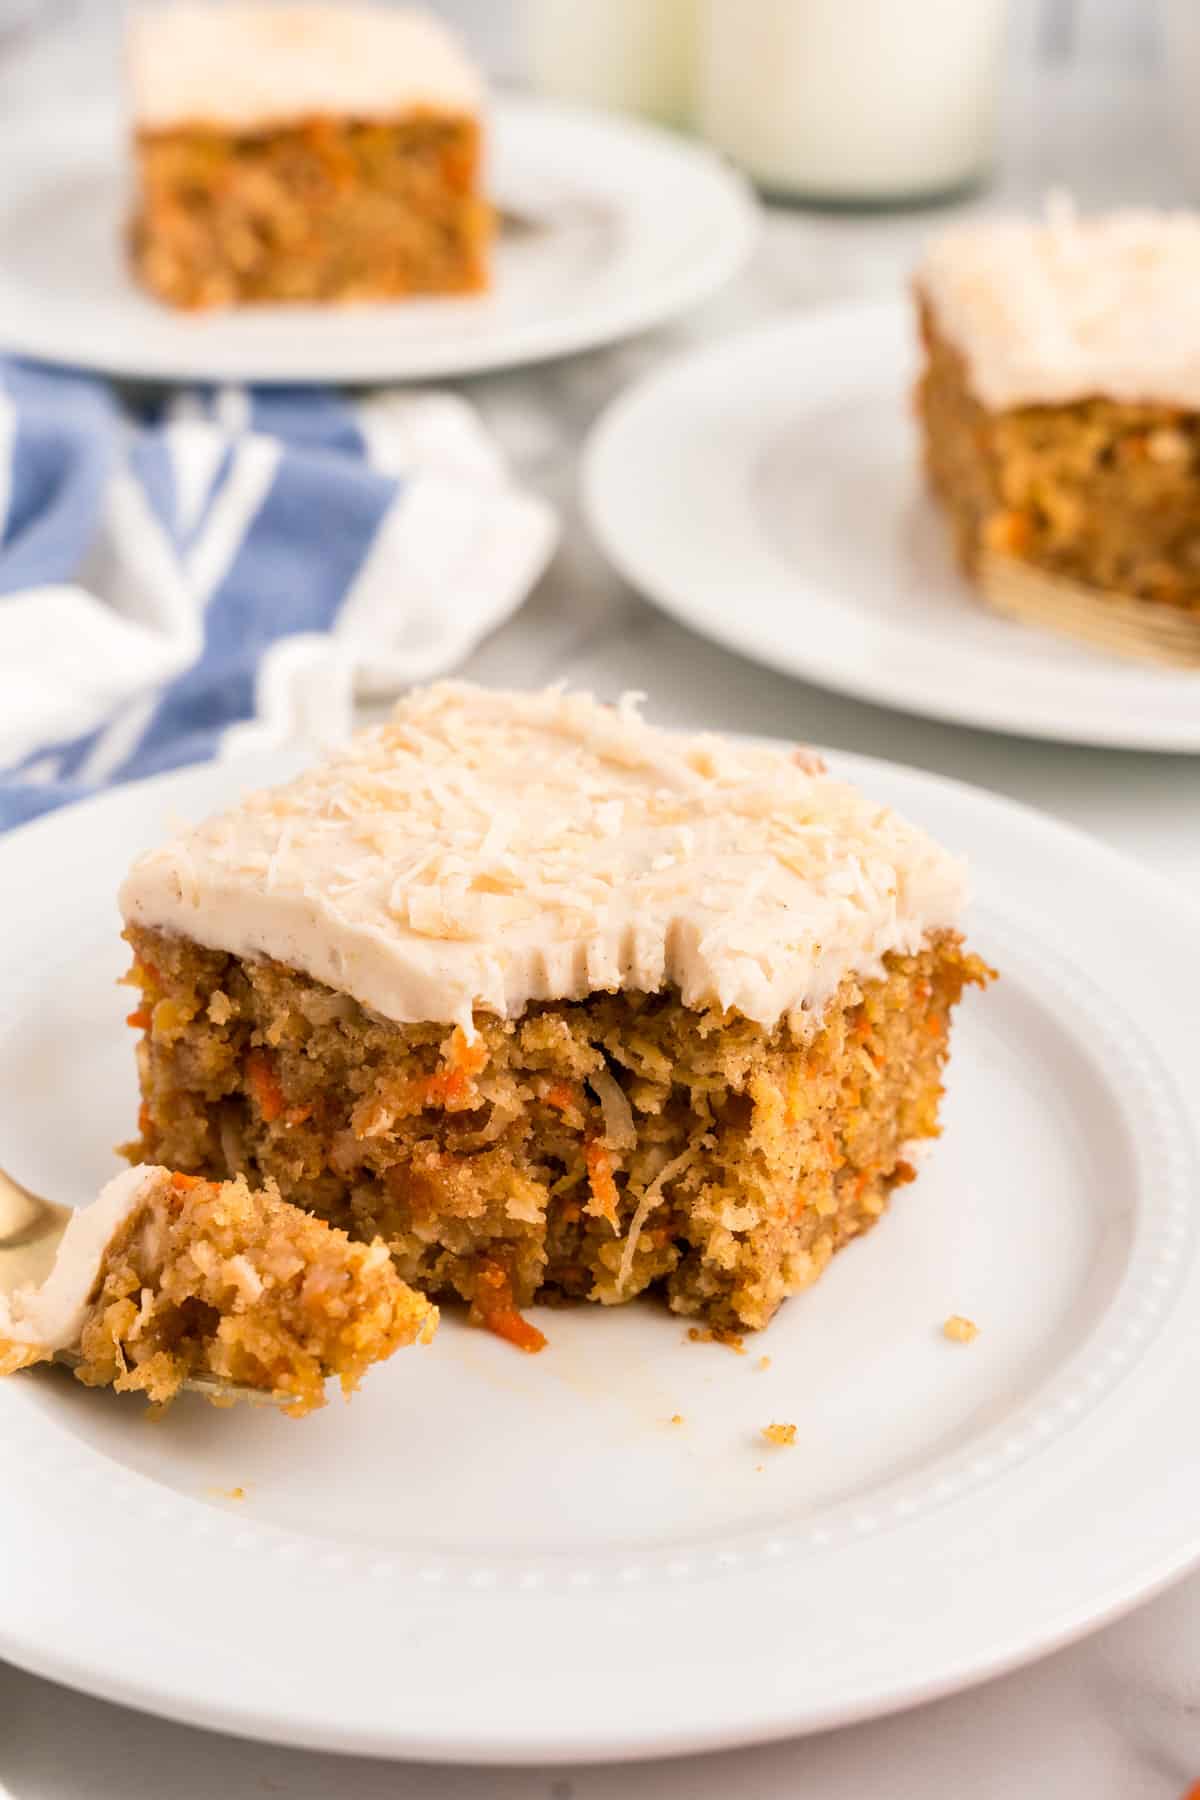 Square piece of Carrot Poke Cake on plate with one bite taken